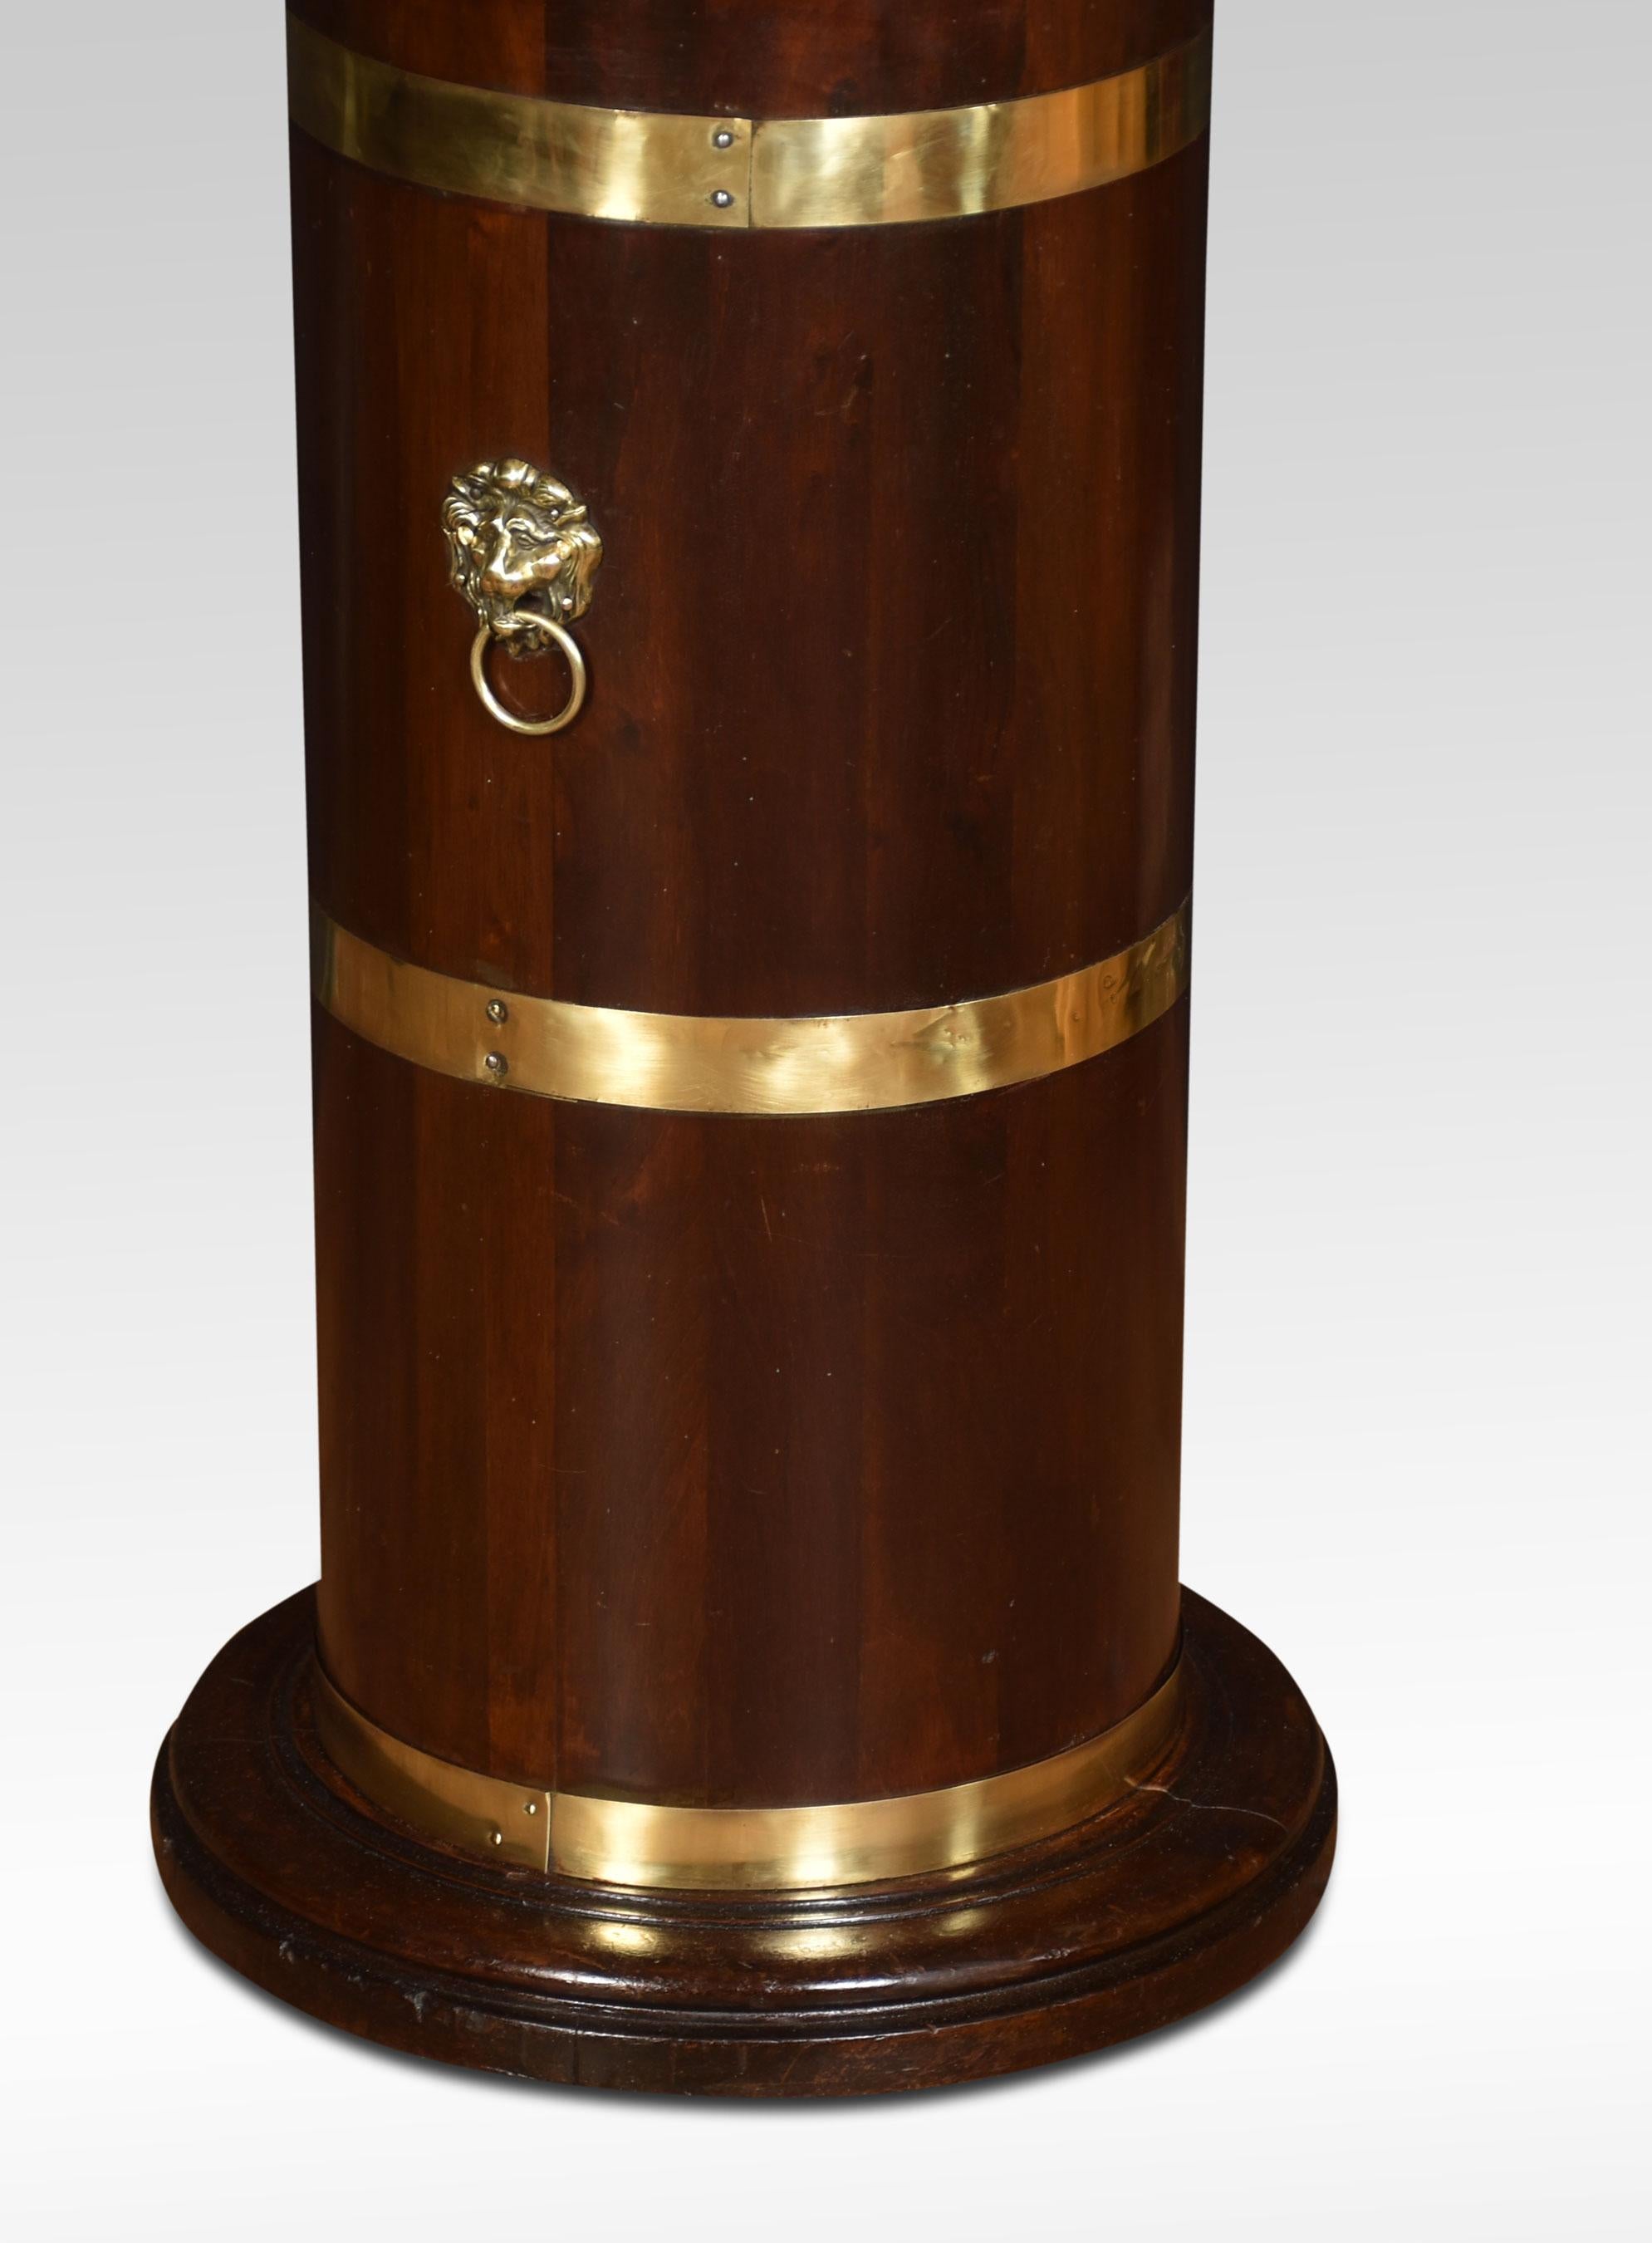 Regency style mahogany and brass bound circular stick stand, with lions mask handles, on a shaped base, having the original metal liner.
Dimensions
Height 26 Inches
Width 14.5 Inches
Depth 14.5 Inches.